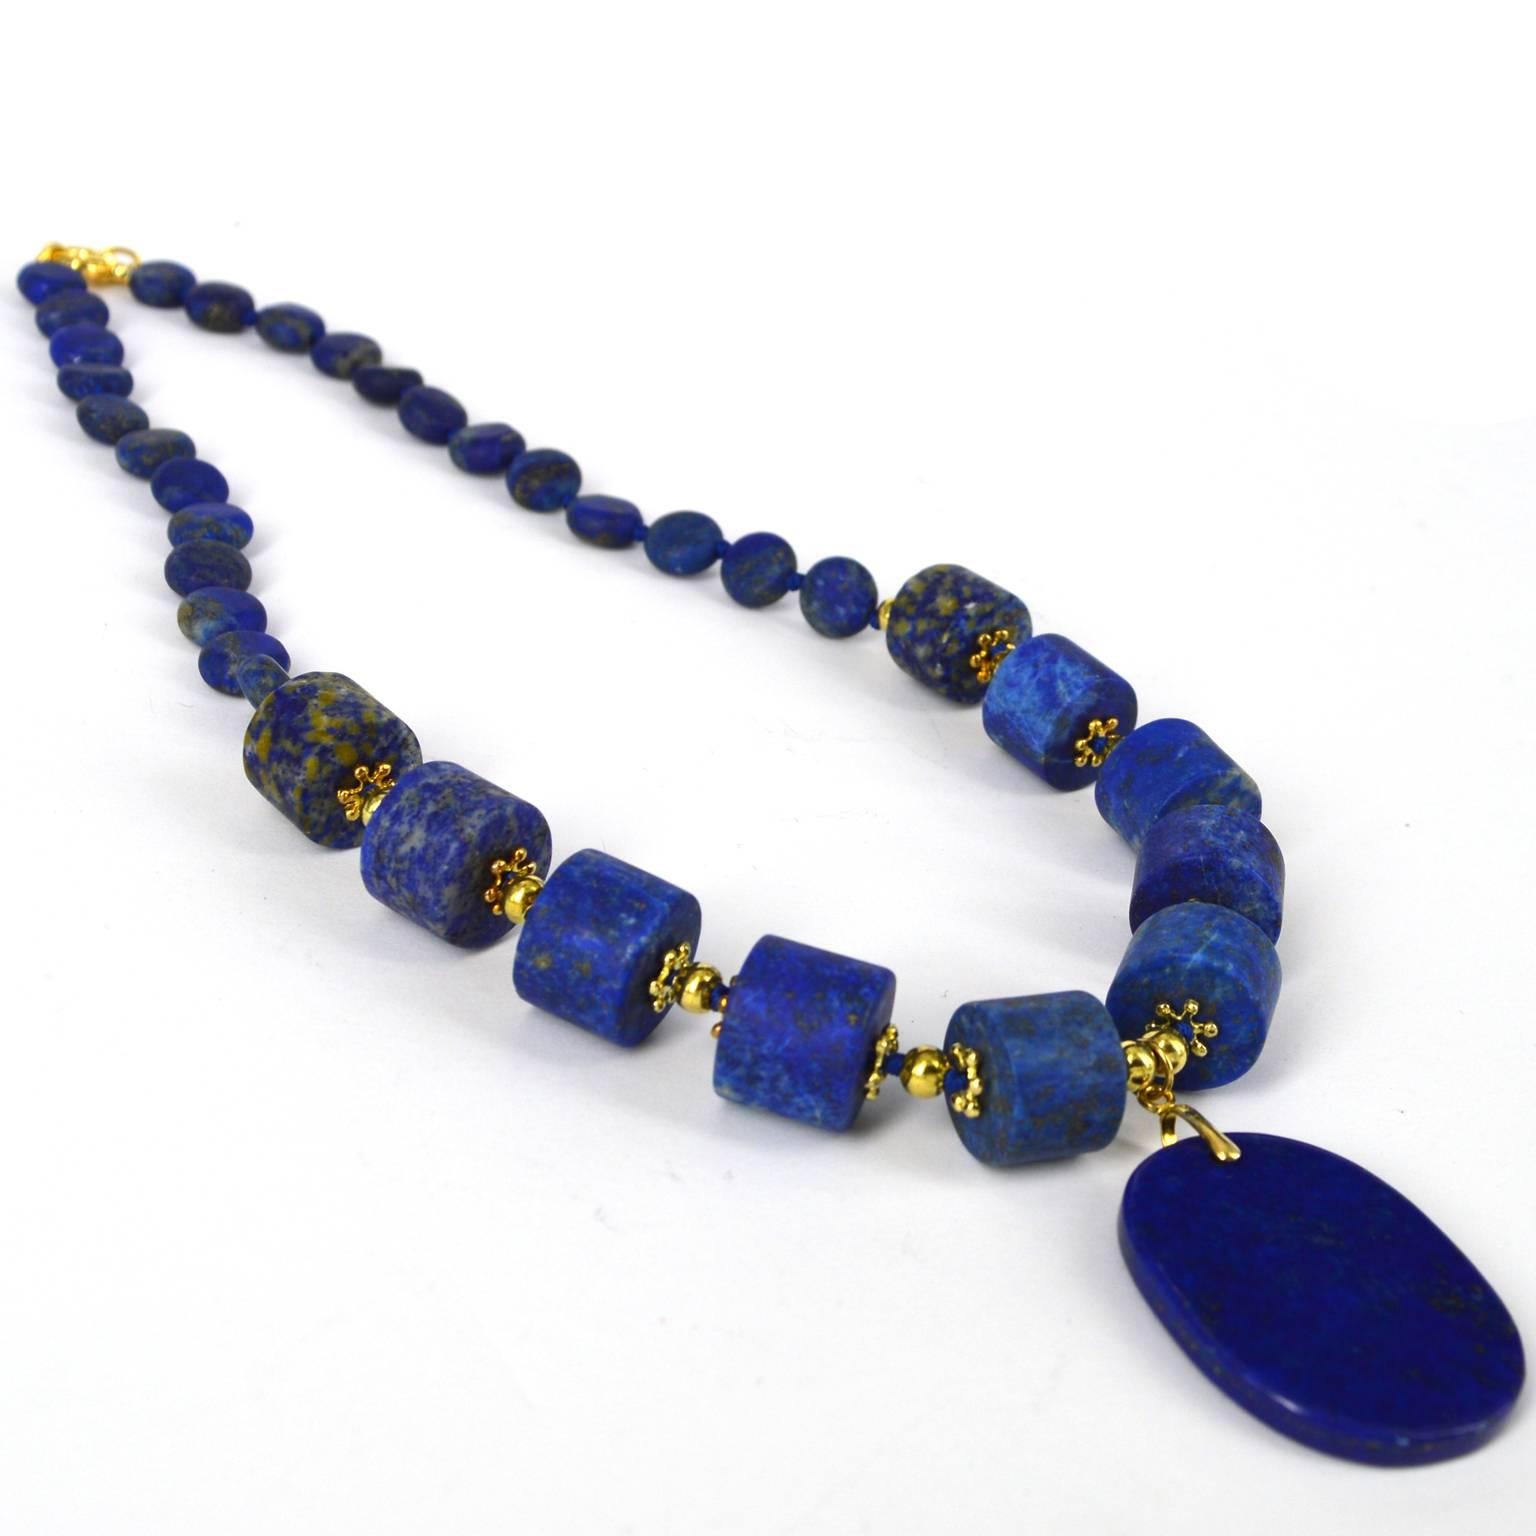 Matt Lapis Lazuli beads with Gold plate Sterling Silver spacer beads show this polished Lapis Lazuli pendant at its best. 10mm flat round matt Lapis Lazuli beads sit at the back of the necklace and the front has 10, 15x11mm matt tube beads spaced